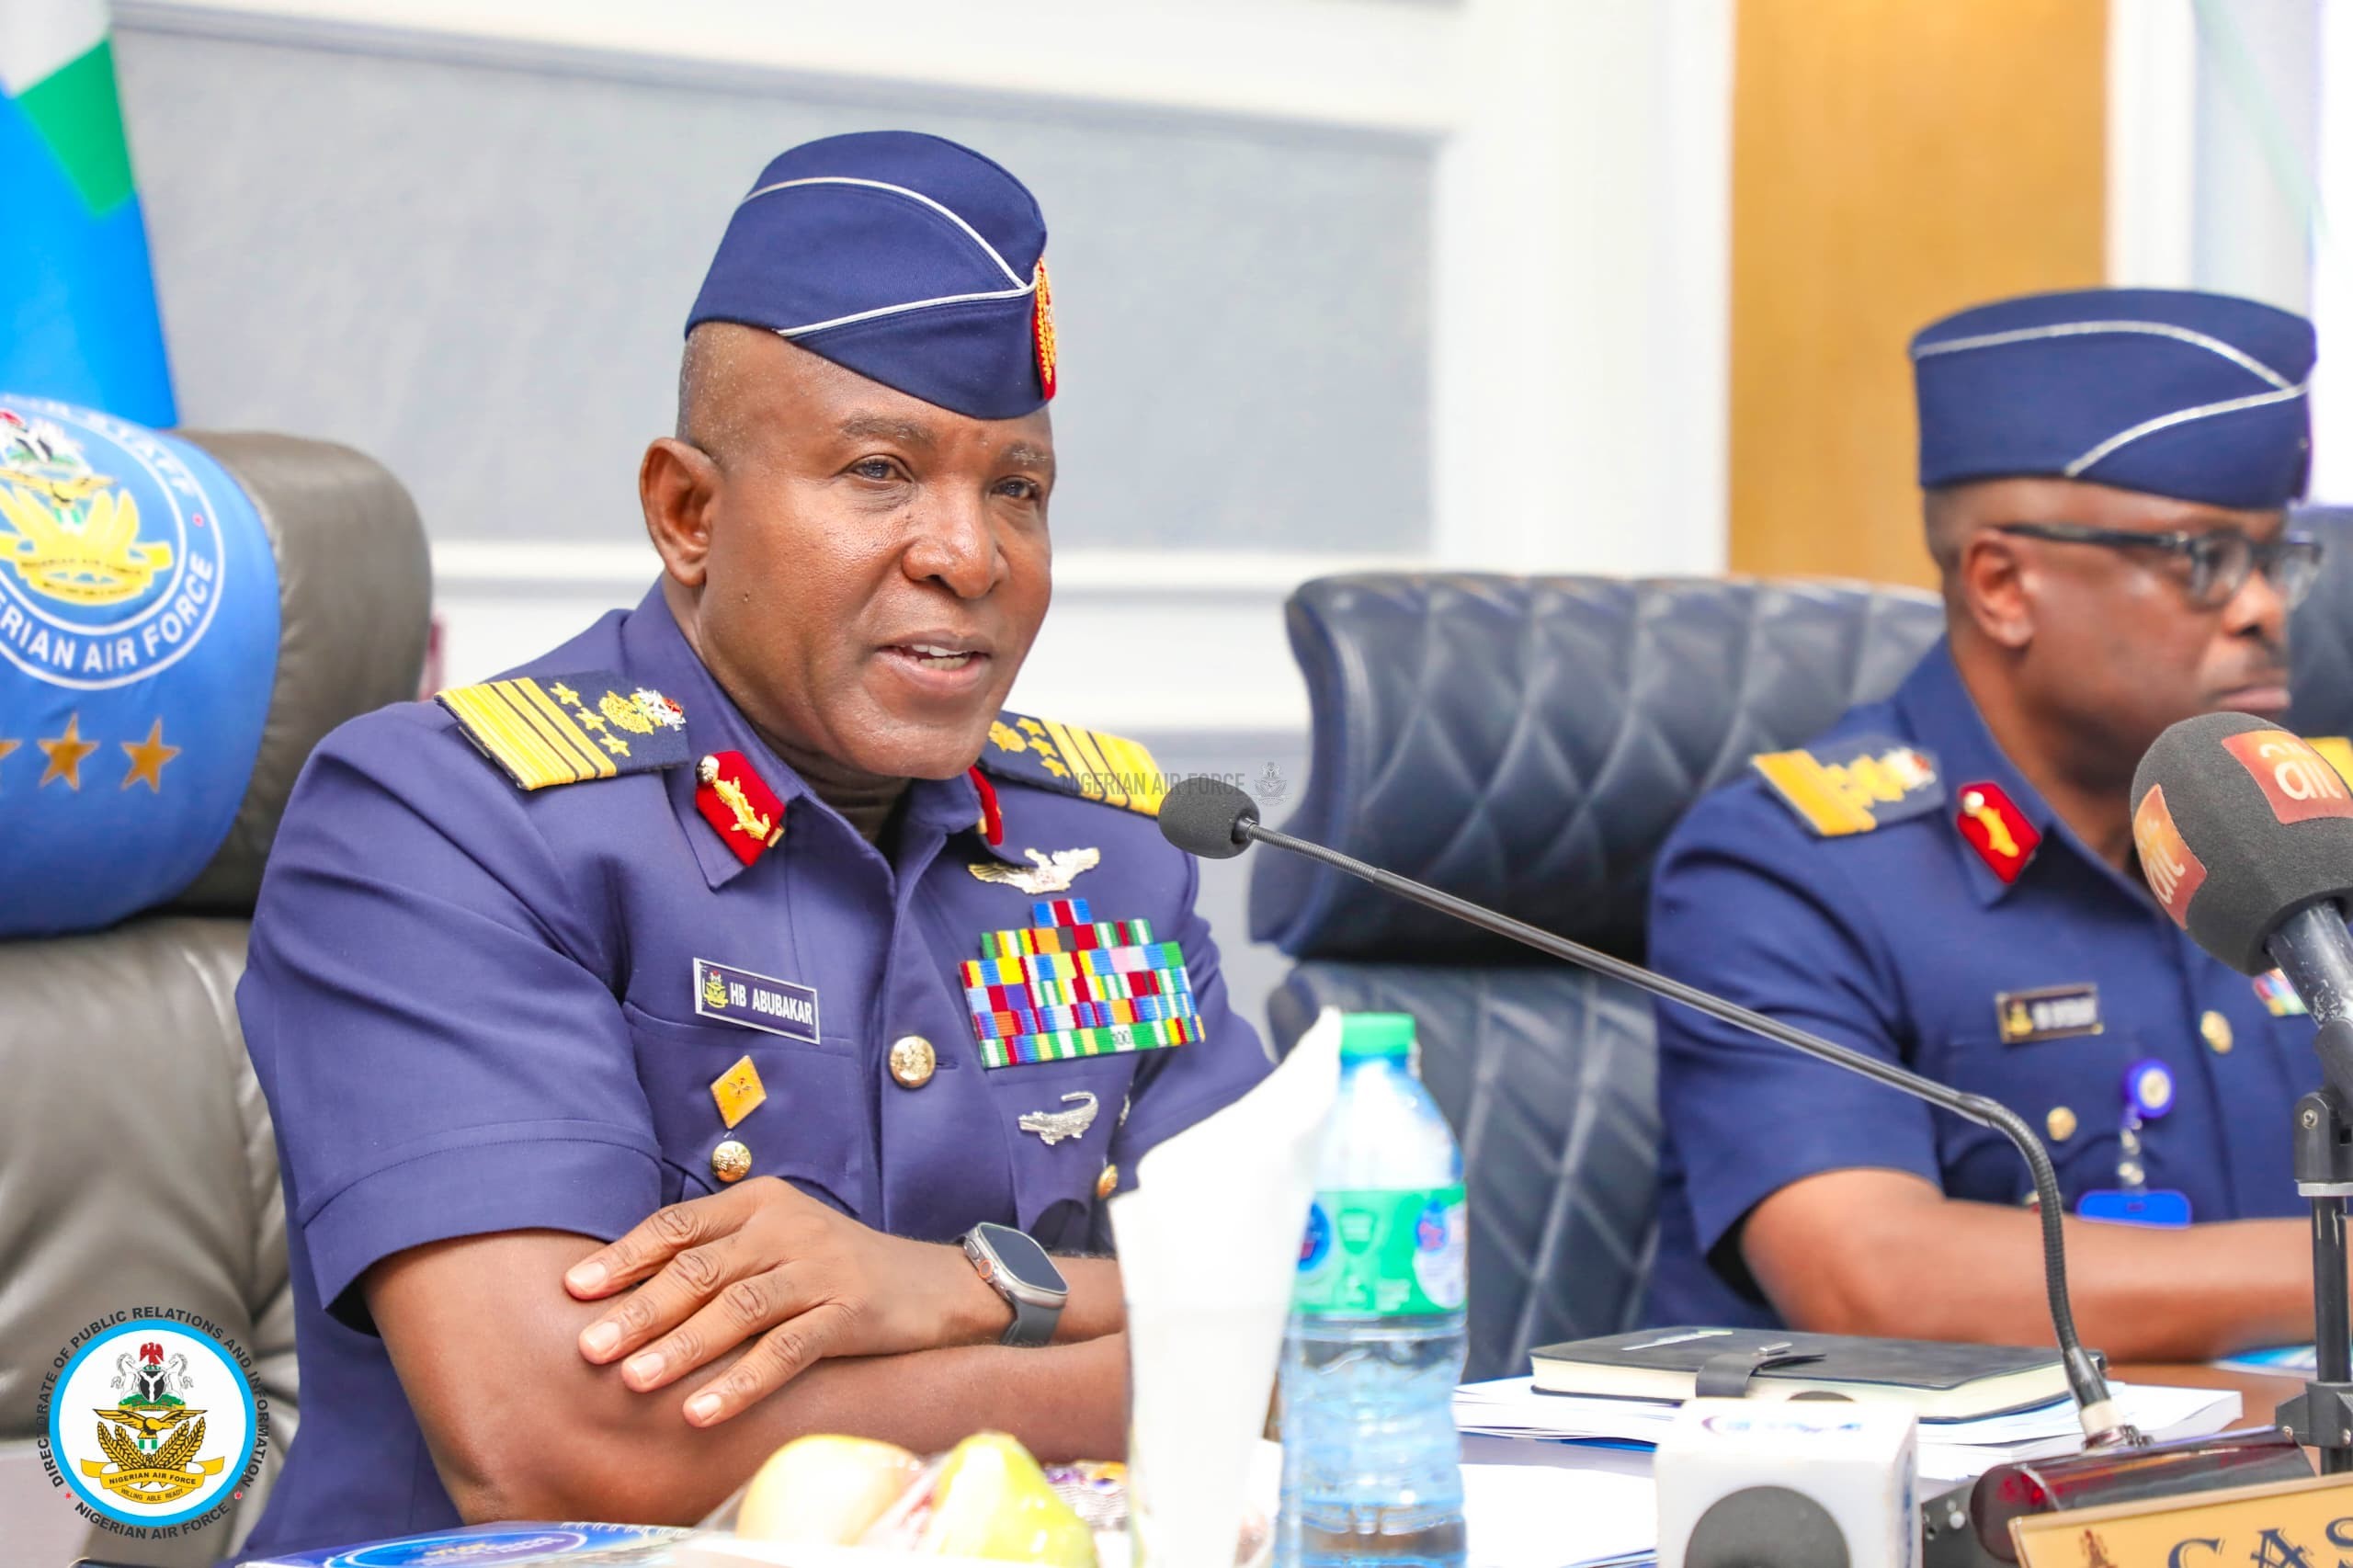 CAS CHAIRS NAF SAFETY REVIEW BOARD, CALLS FOR APPROPRIATE ACTIONS TO BREAK ACCIDENT CHAIN